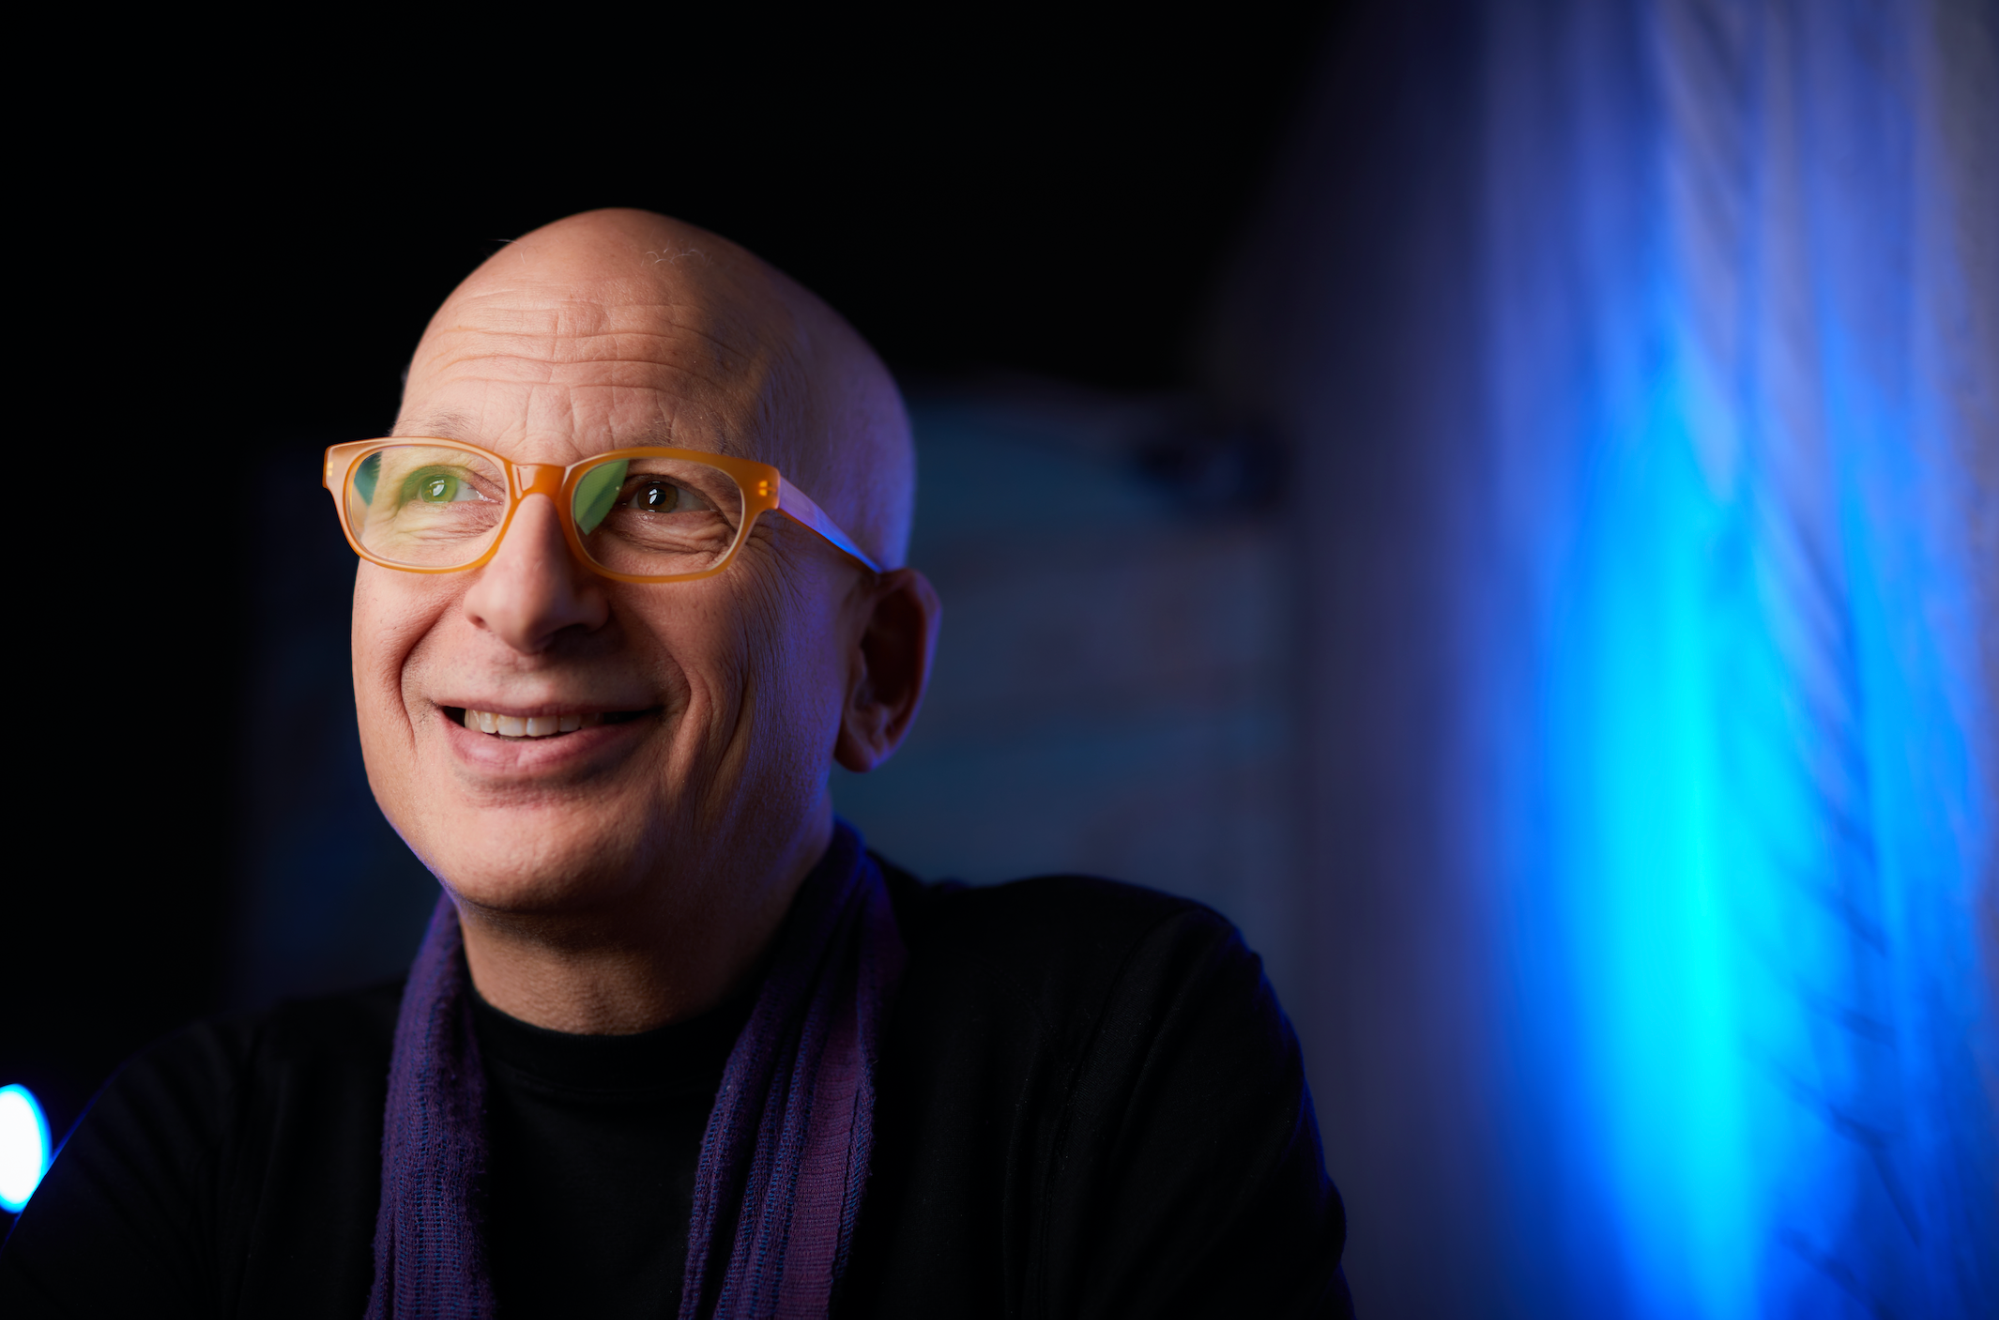 Seth Godin says new leaders can emerge in the face of crisis.